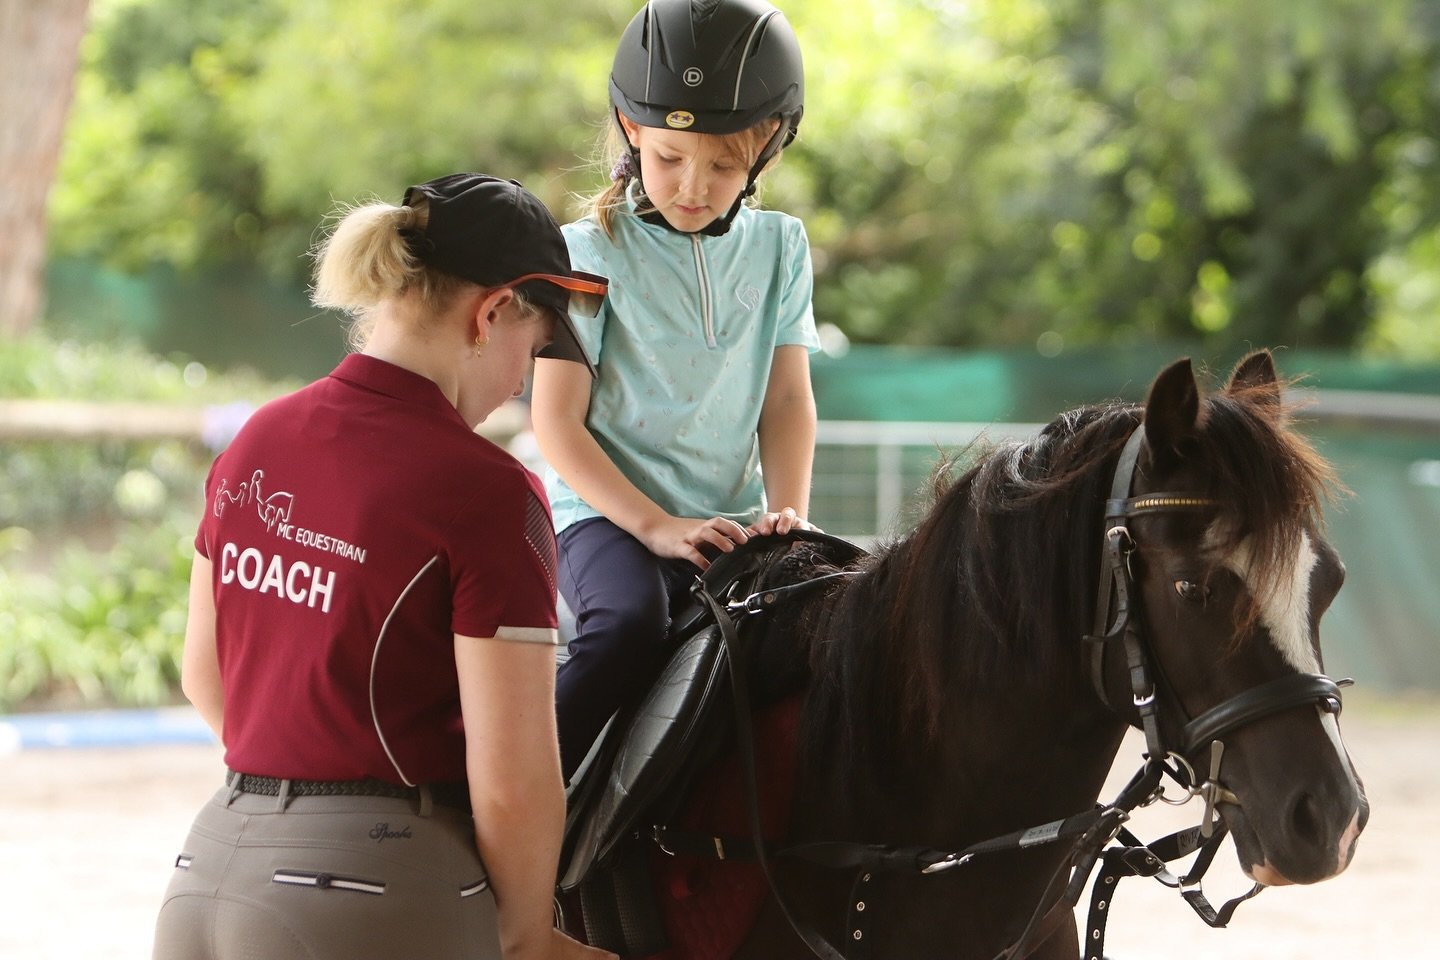 School holiday riding fun!! Join a camp, take a private lesson or bring your own group! Undercover area is perfect for all weather! Get in touch today. 

Link in bio.

#ridinglessons #schoolholidayactivities #activitiesforkids #holidaycamps #horserid